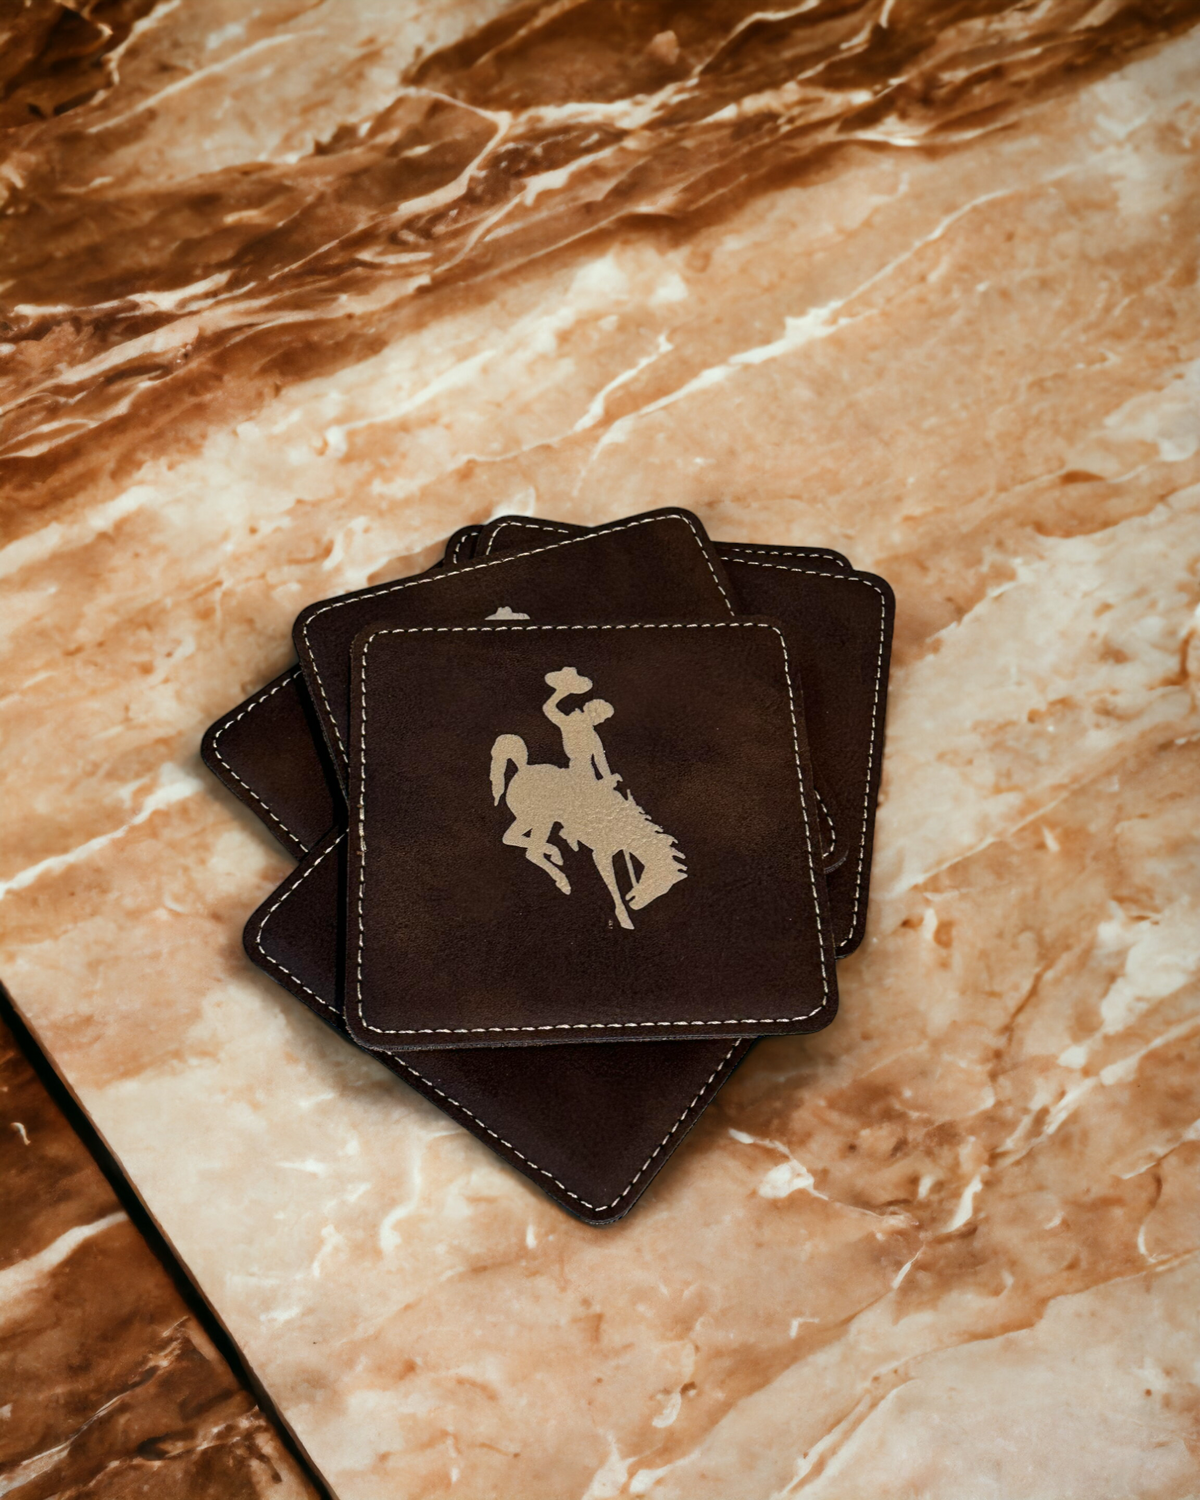 Our Wyoming Steamboat Leatherette Coasters bring an air of classic Western charm to your home!